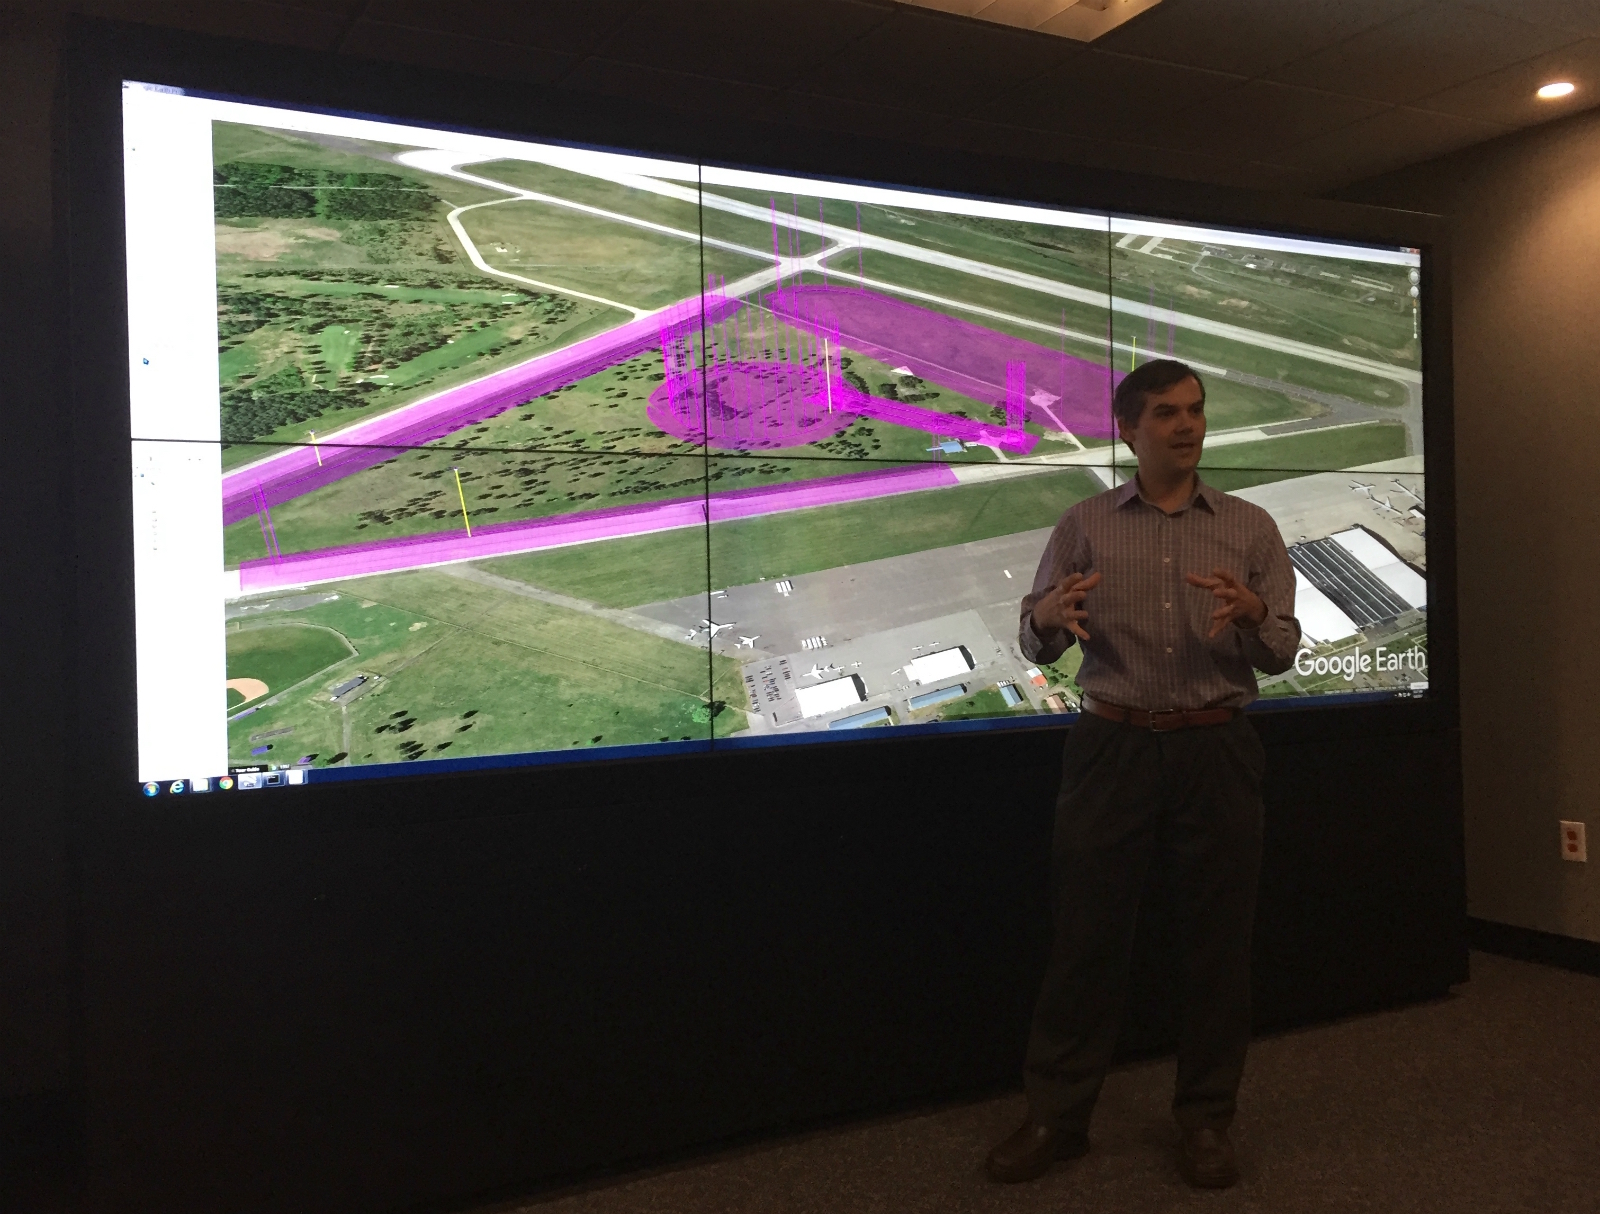 At NASA's Ames Research Center in Mountain View, Joey Rios, the drone traffic management project's technical lead, demonstrates how multiple drones flying close together can avoid colliding.